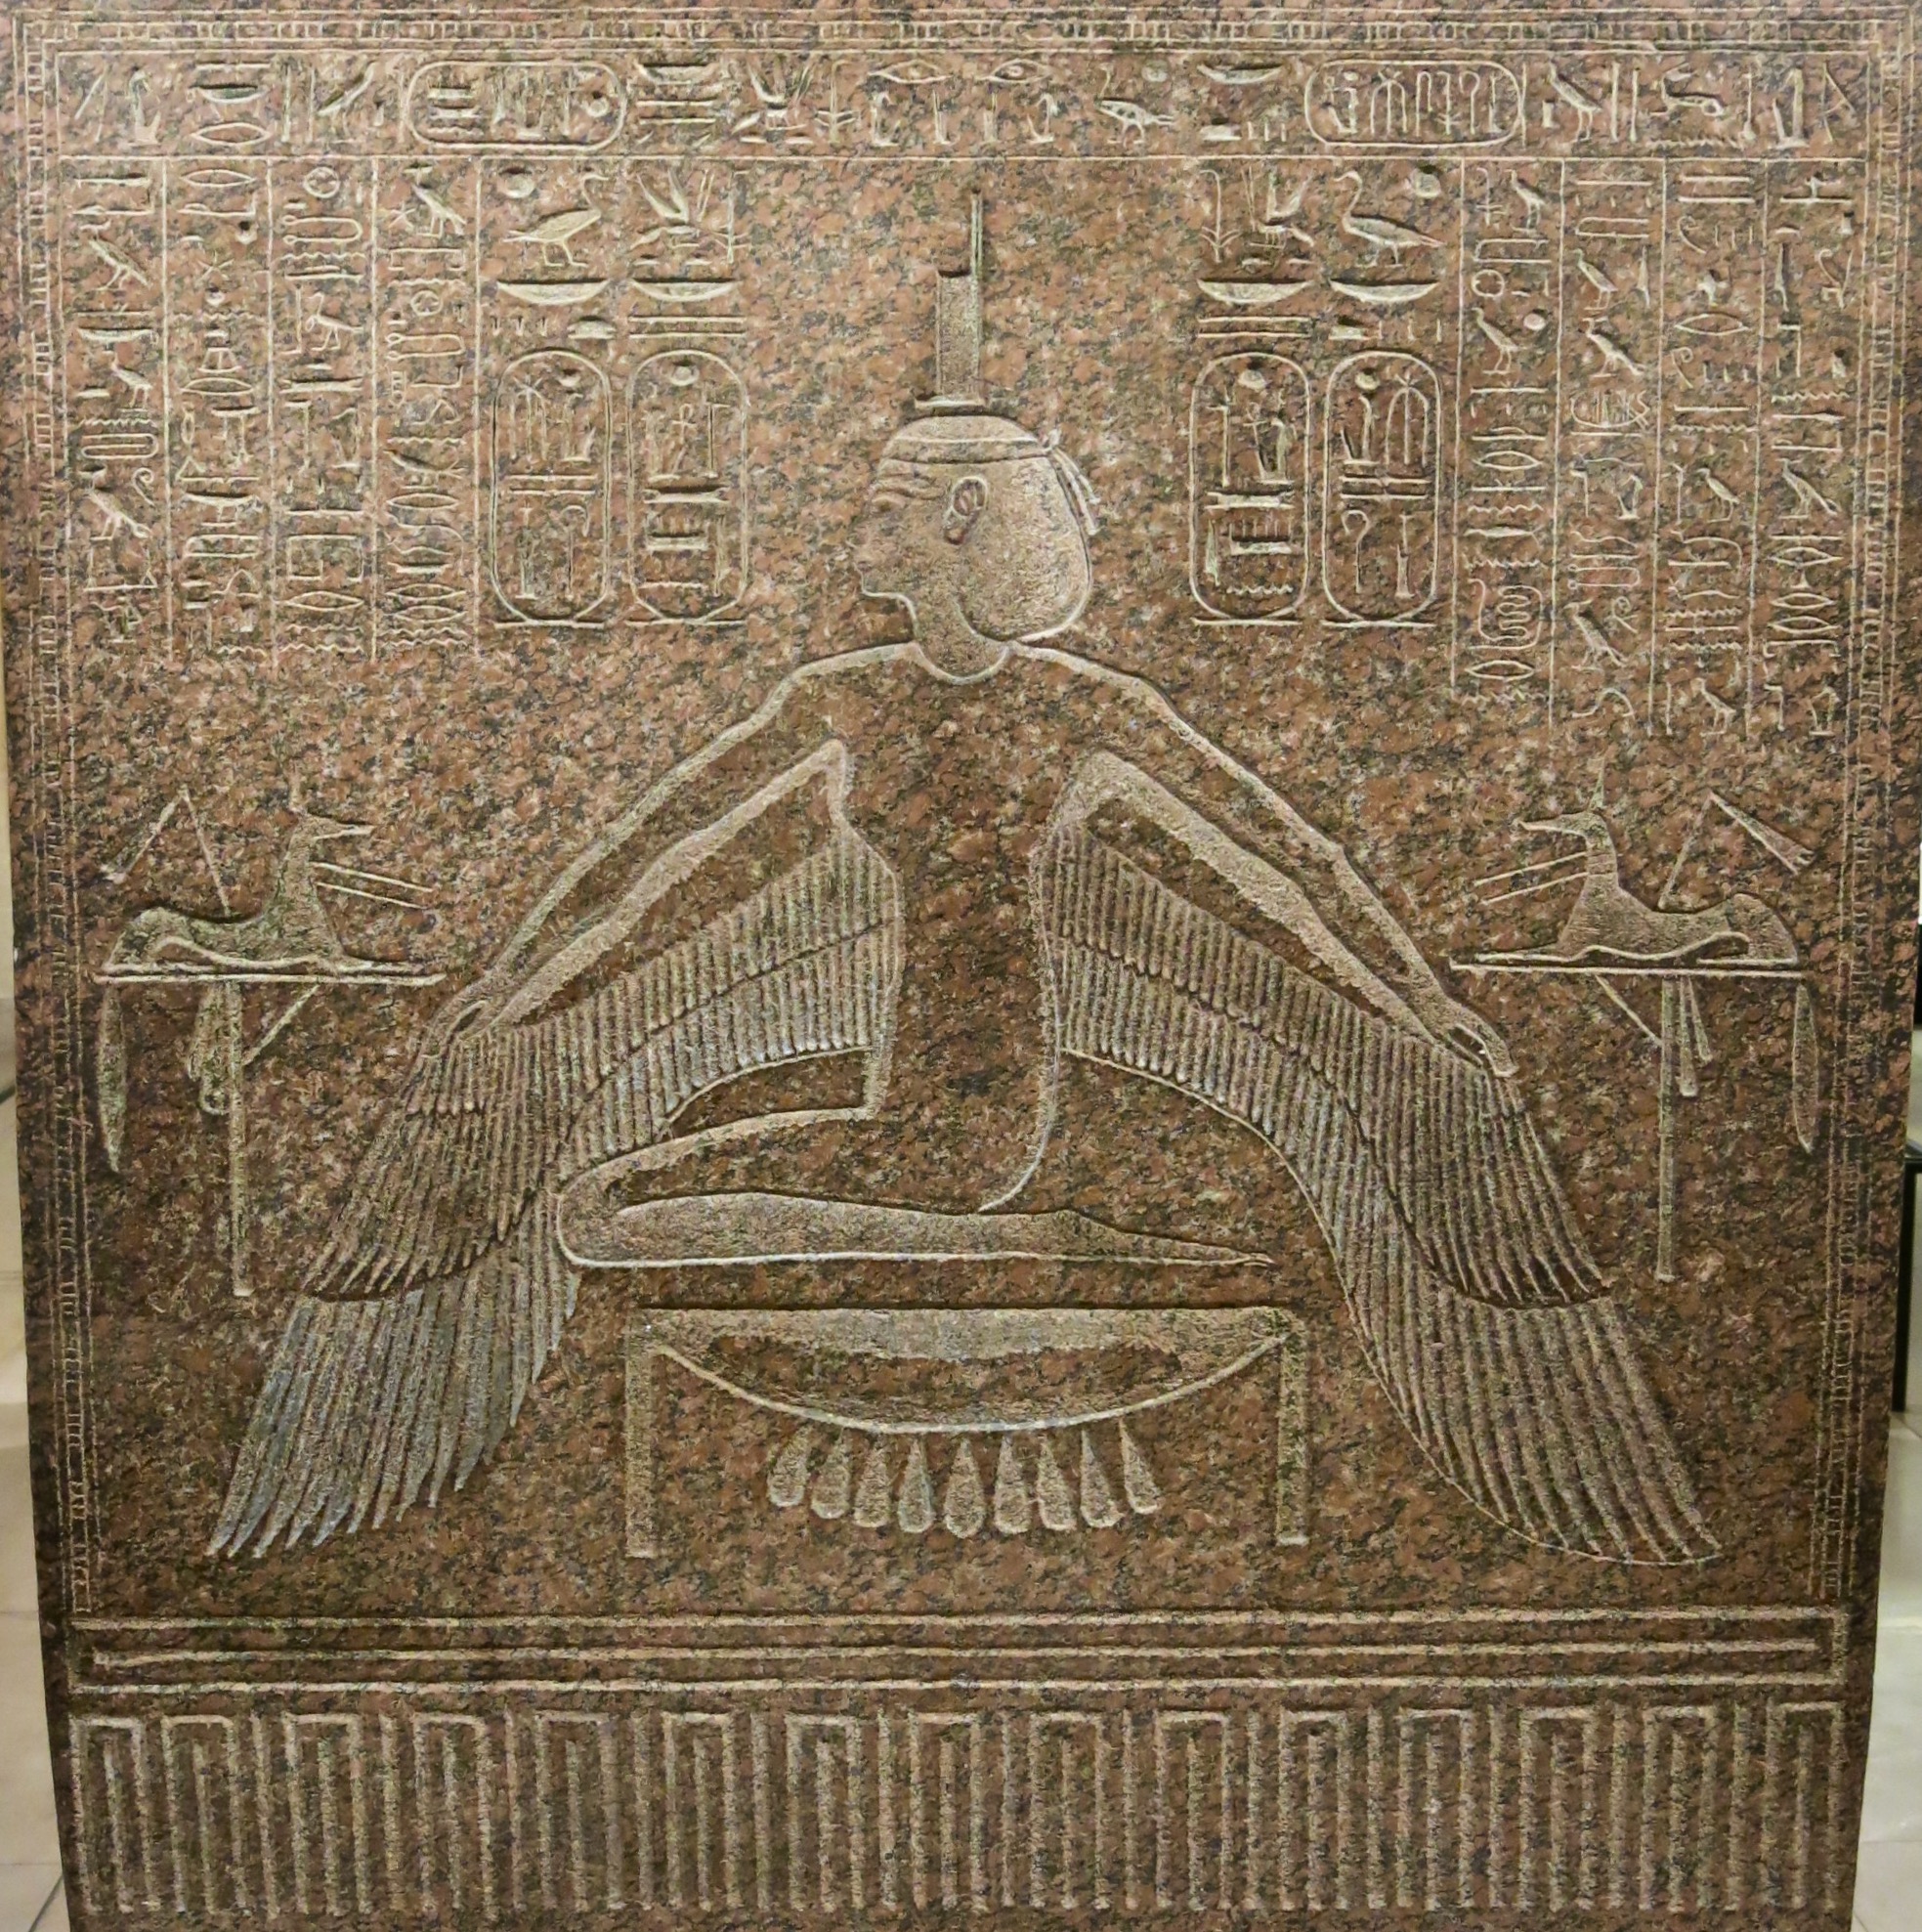 Goddess Isis depicted on Ramses III's sarcophagus